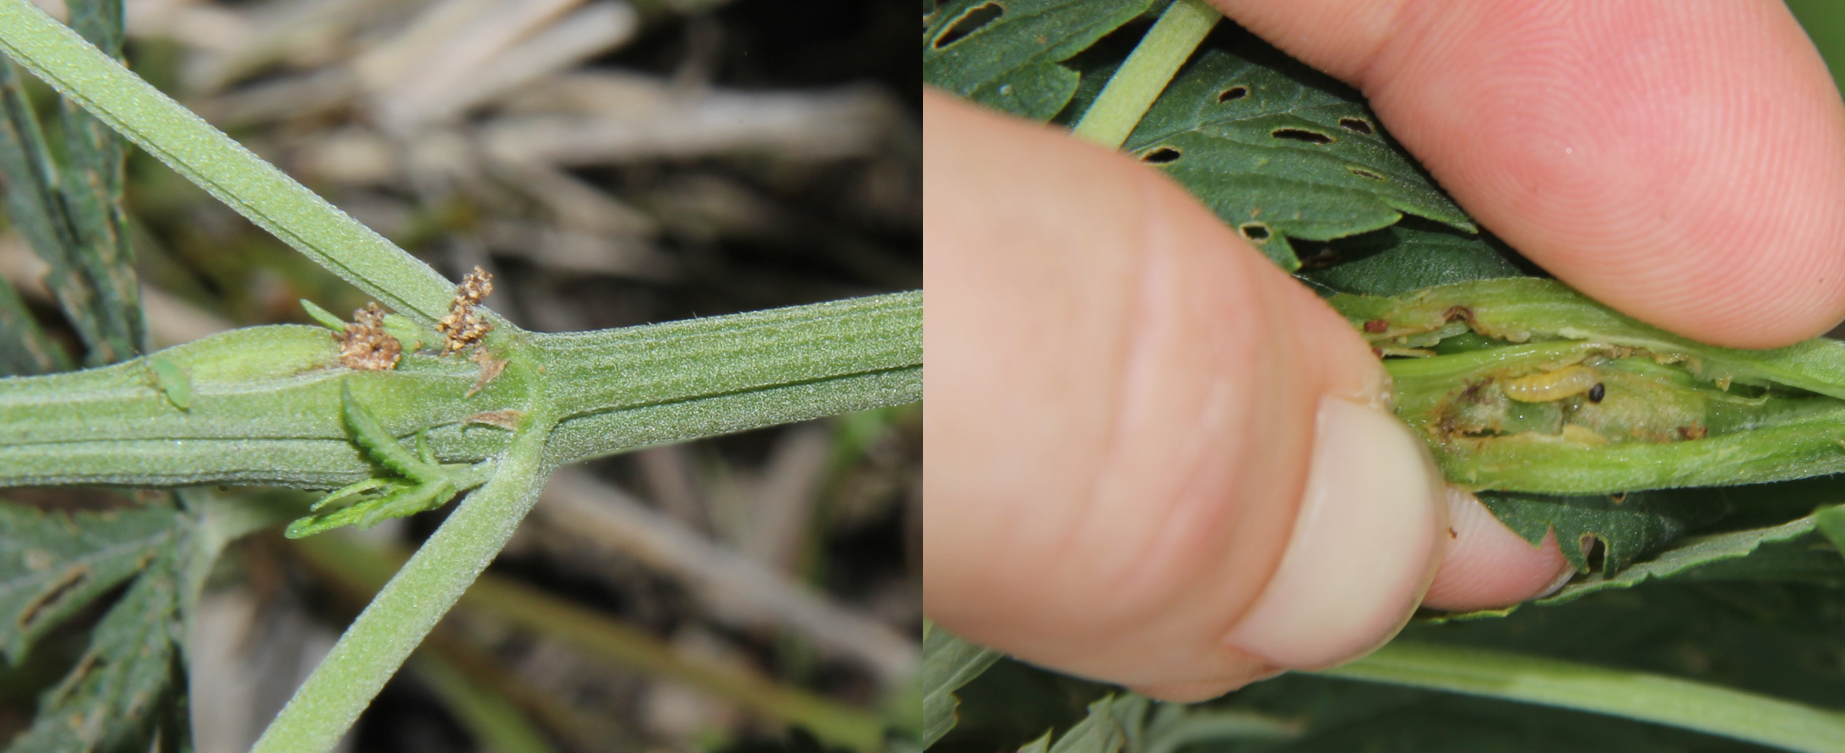 Any easy way to look for Eurasian hemp borer is to check for bulges in the stem and frass on the outside. If you are willing to sacrifice the branch or stem, you can cut it open to find the larvae.